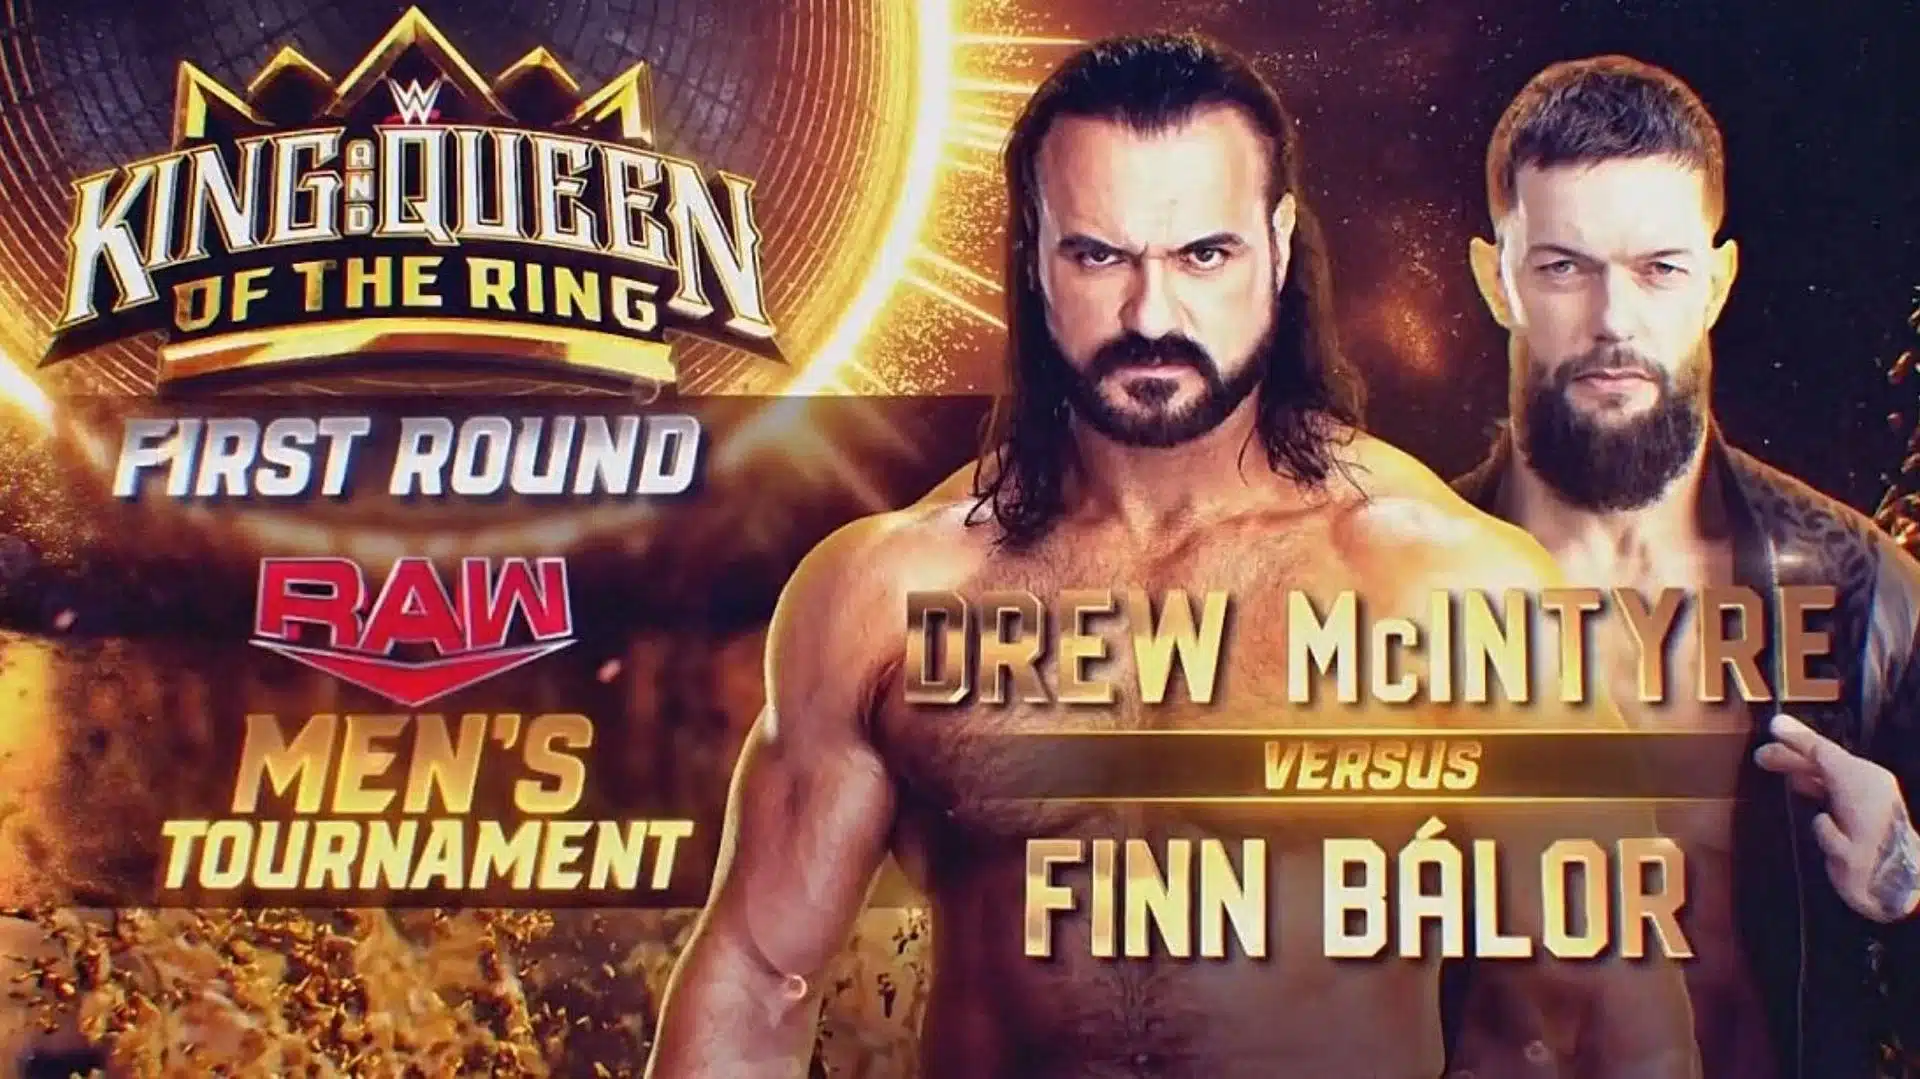 Drew McIntyre Withdrawn from The King Of The Ring Tournament